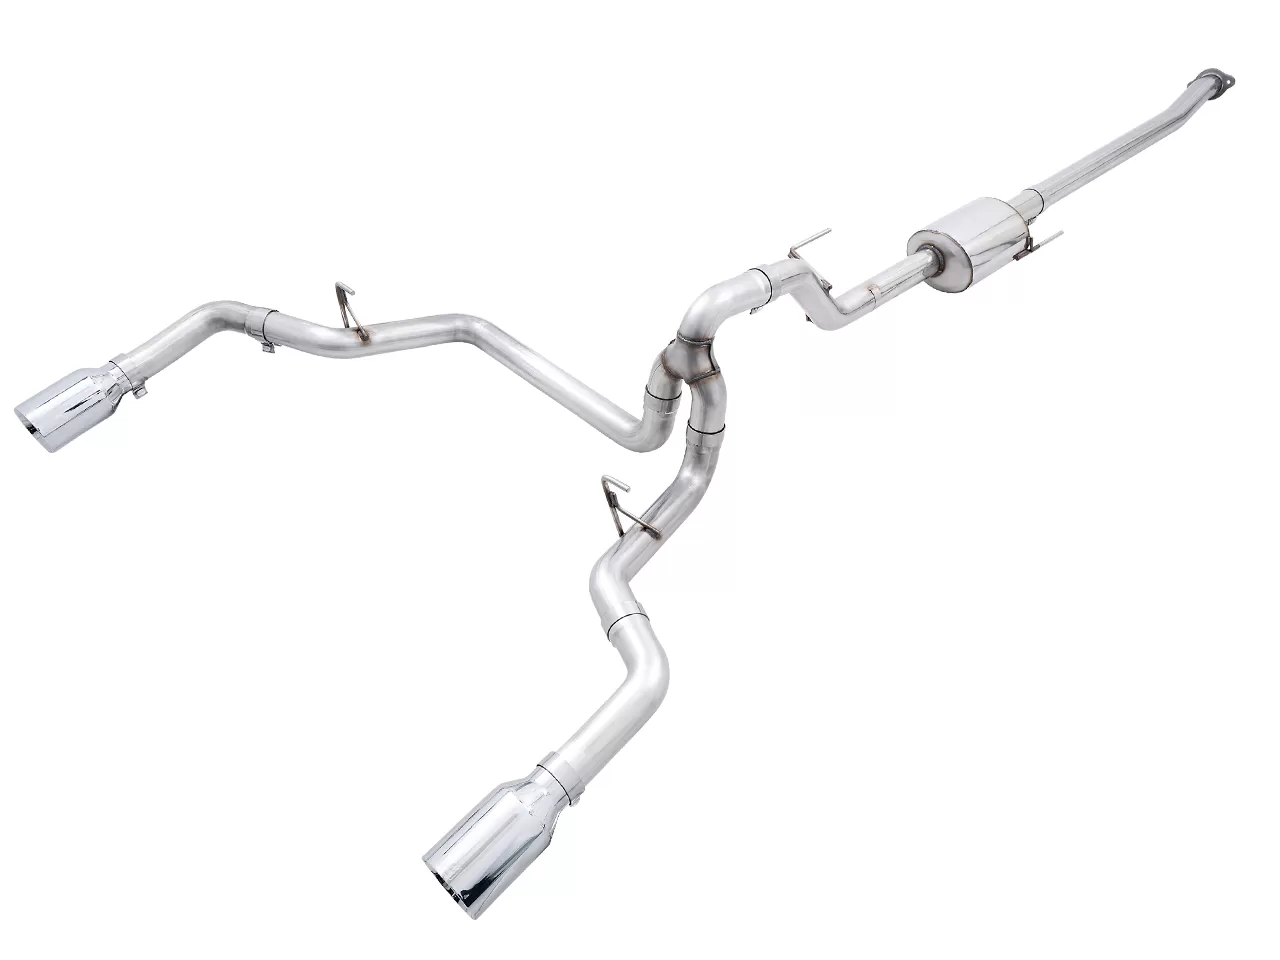 AWE 0FG Dual Split Rear Exhaust for '21+ Ford F-150 - 5" Chrome Silver Tips Ford F-150 King Ranch|Lariat|Limited|Platinum|XL|XLT 2021-2023 - 3015-32105